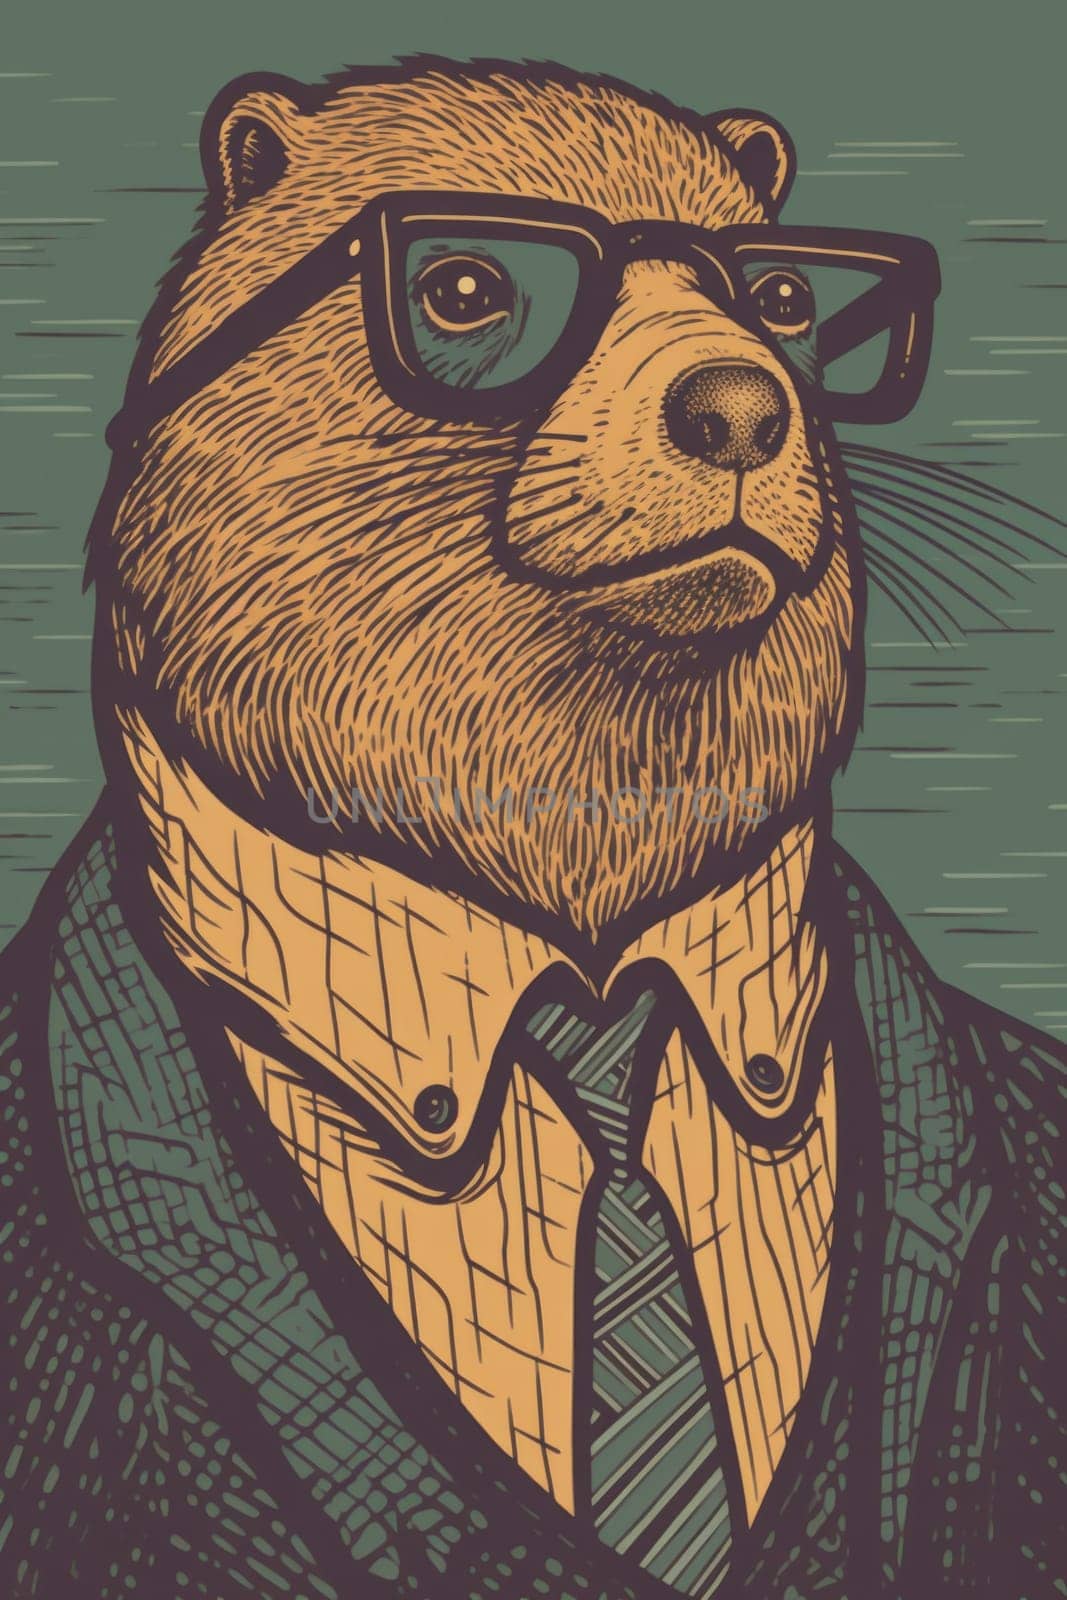 A drawing of a bear wearing glasses and a tie